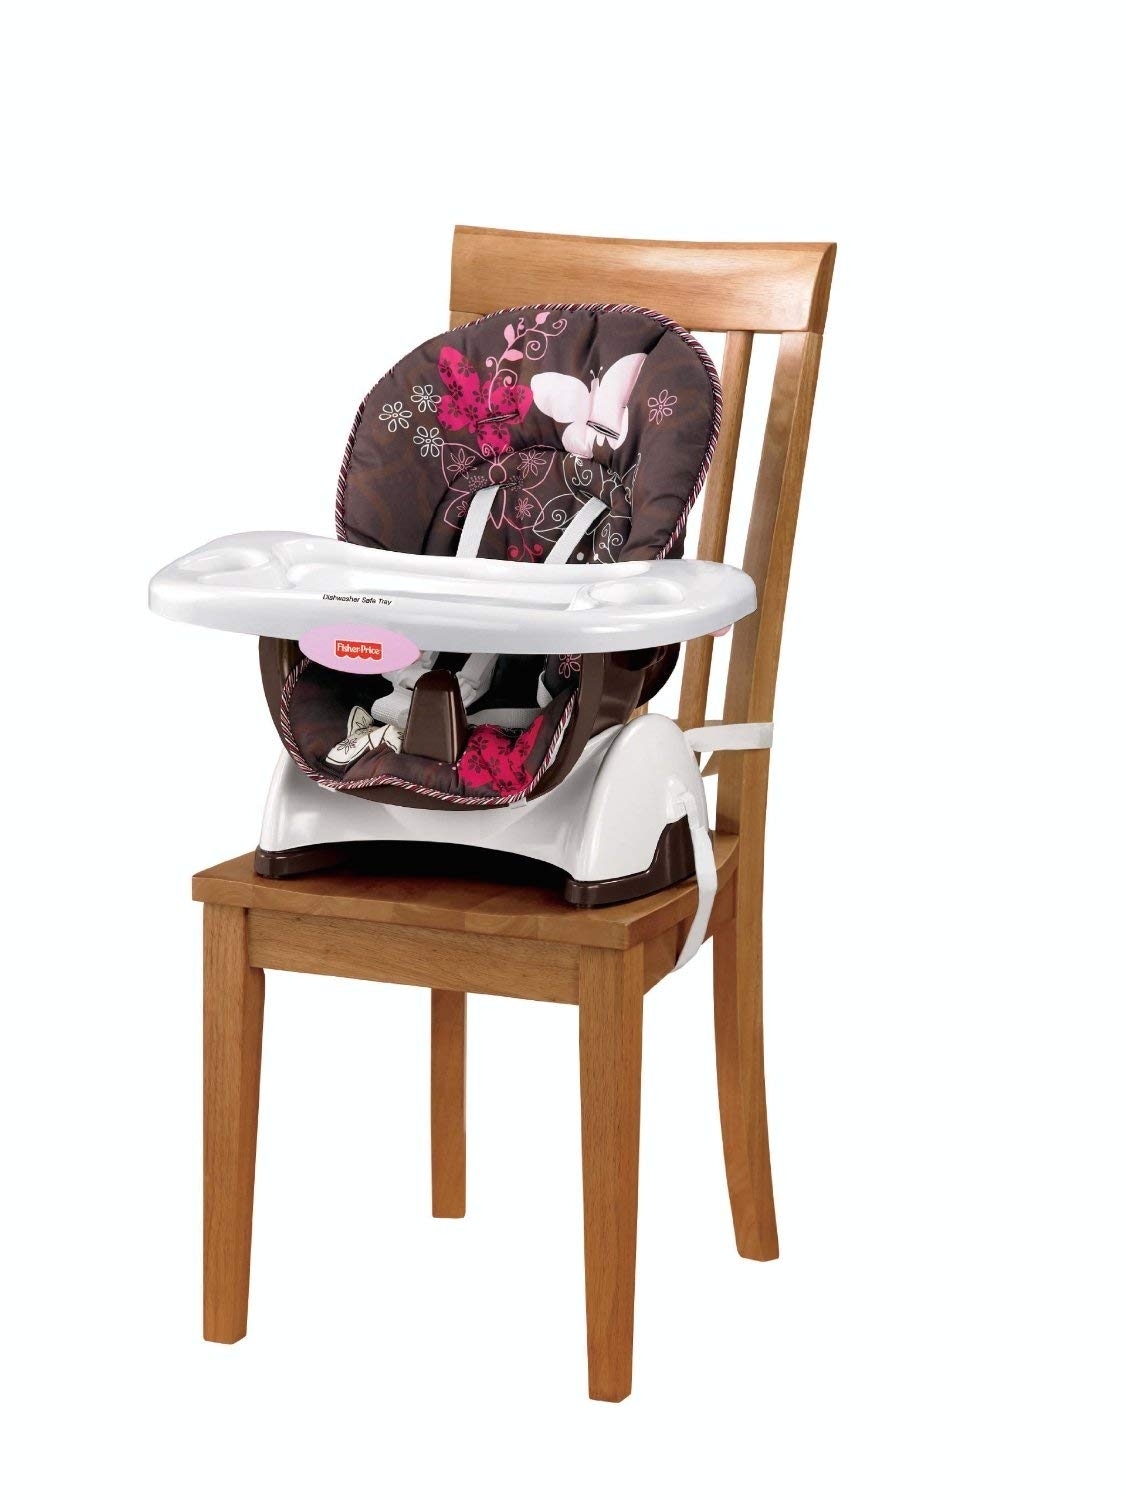 First Years Space Saving High Chair Amazon Com Fisher Price Space Saver High Chair Mocha butterfly